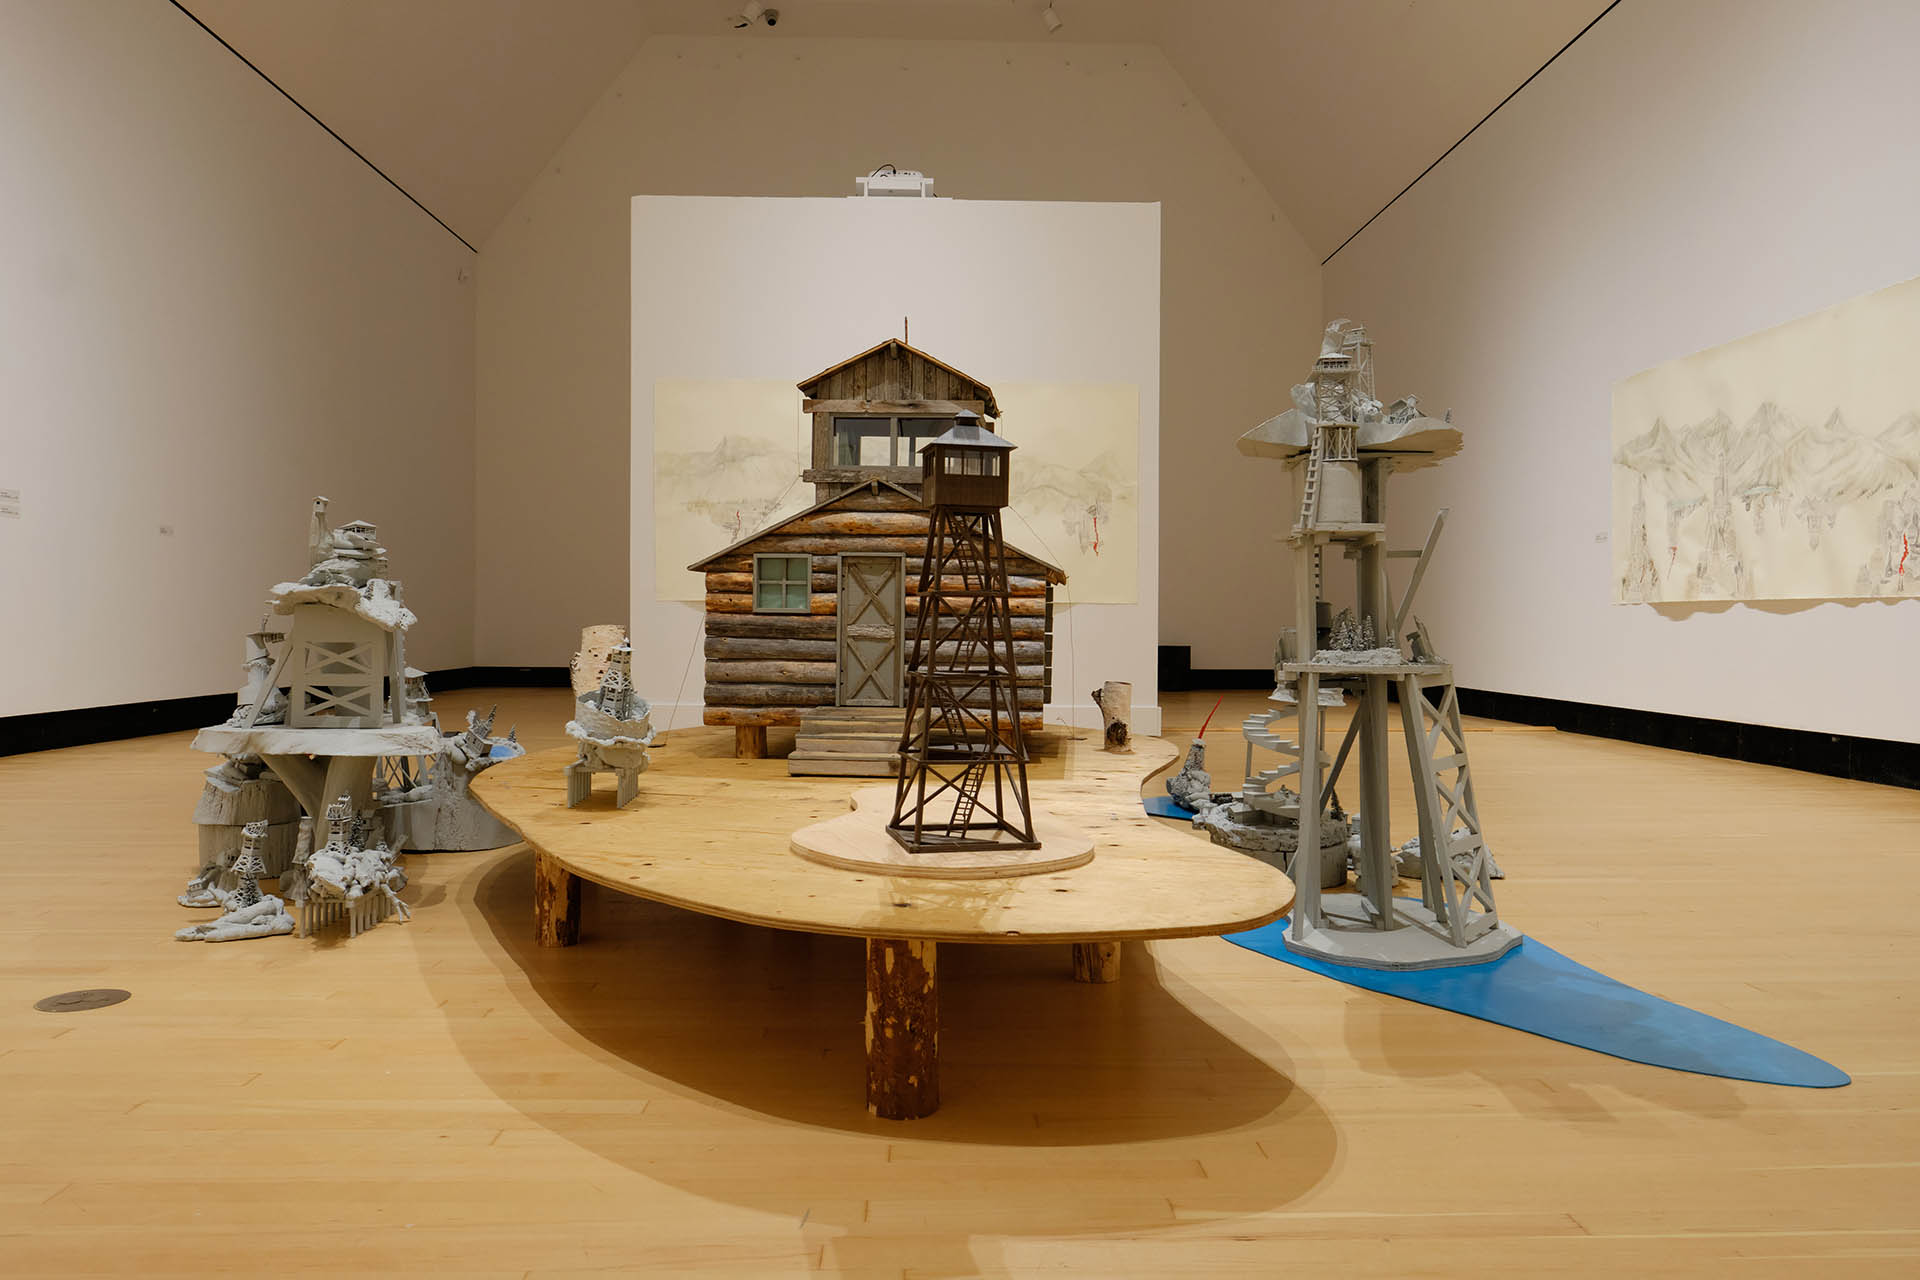 The Wilderness of Mirrors. Grouping of sculptures featuring fire tower models and a quarter scale log cabin arranged on a gallery floor.